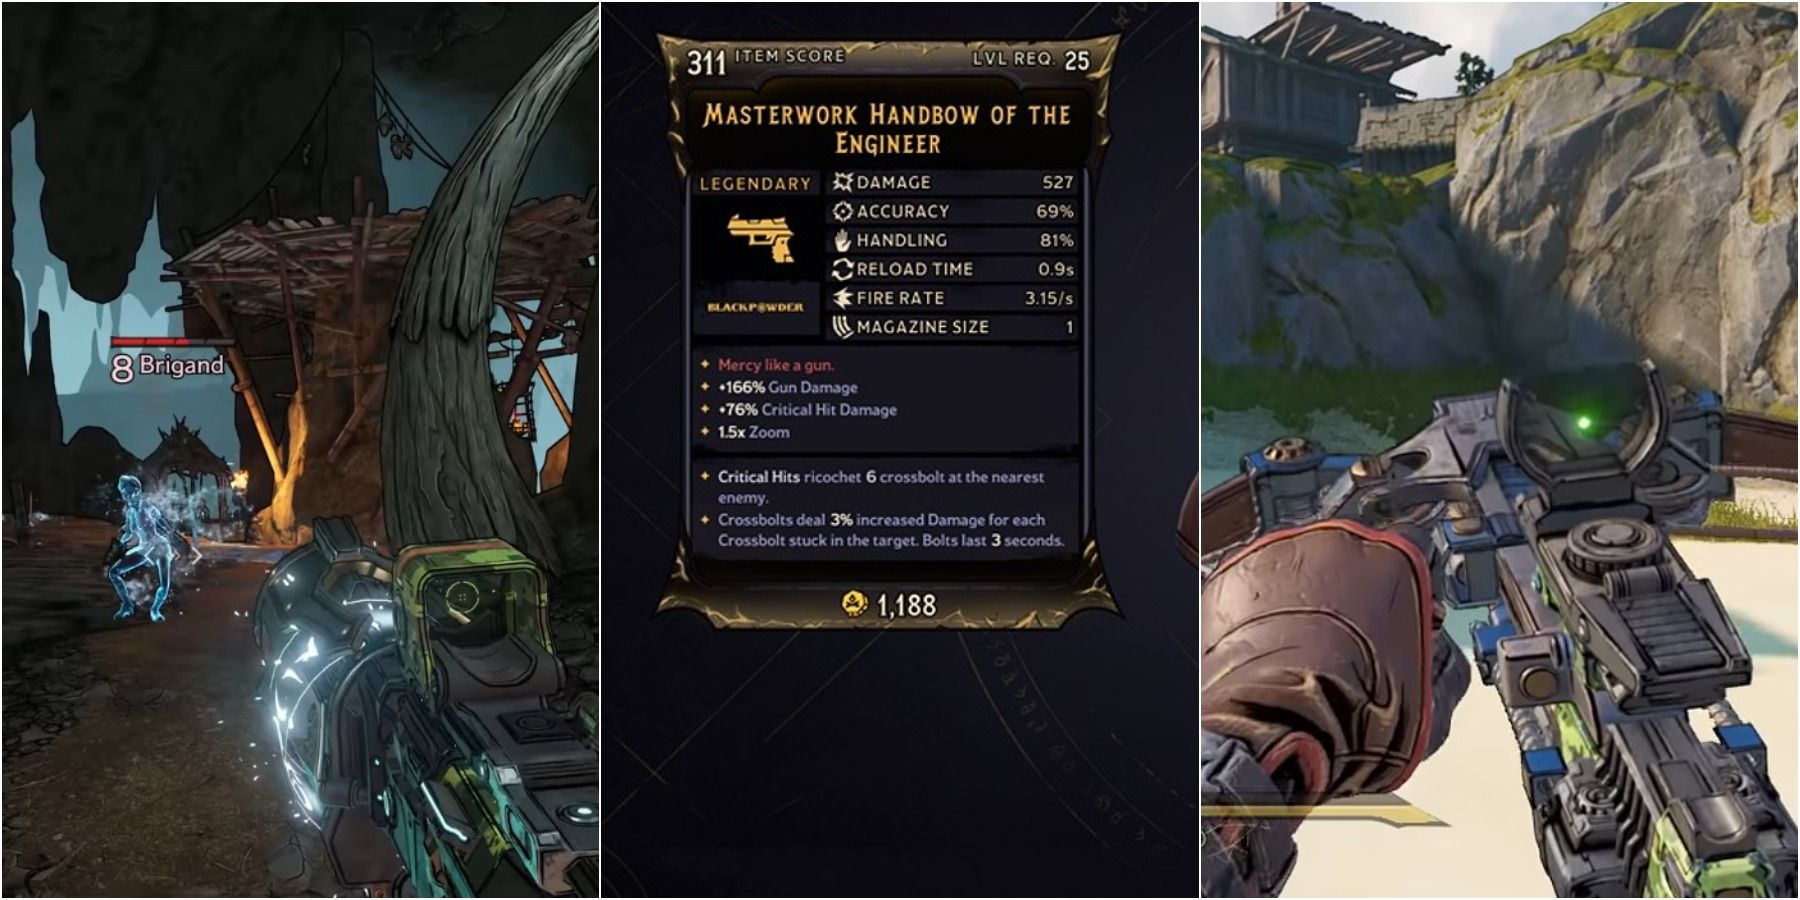 Tiny Tina Wonderlands split image of frost SMG and Thumbsbane firing, Handbow stats